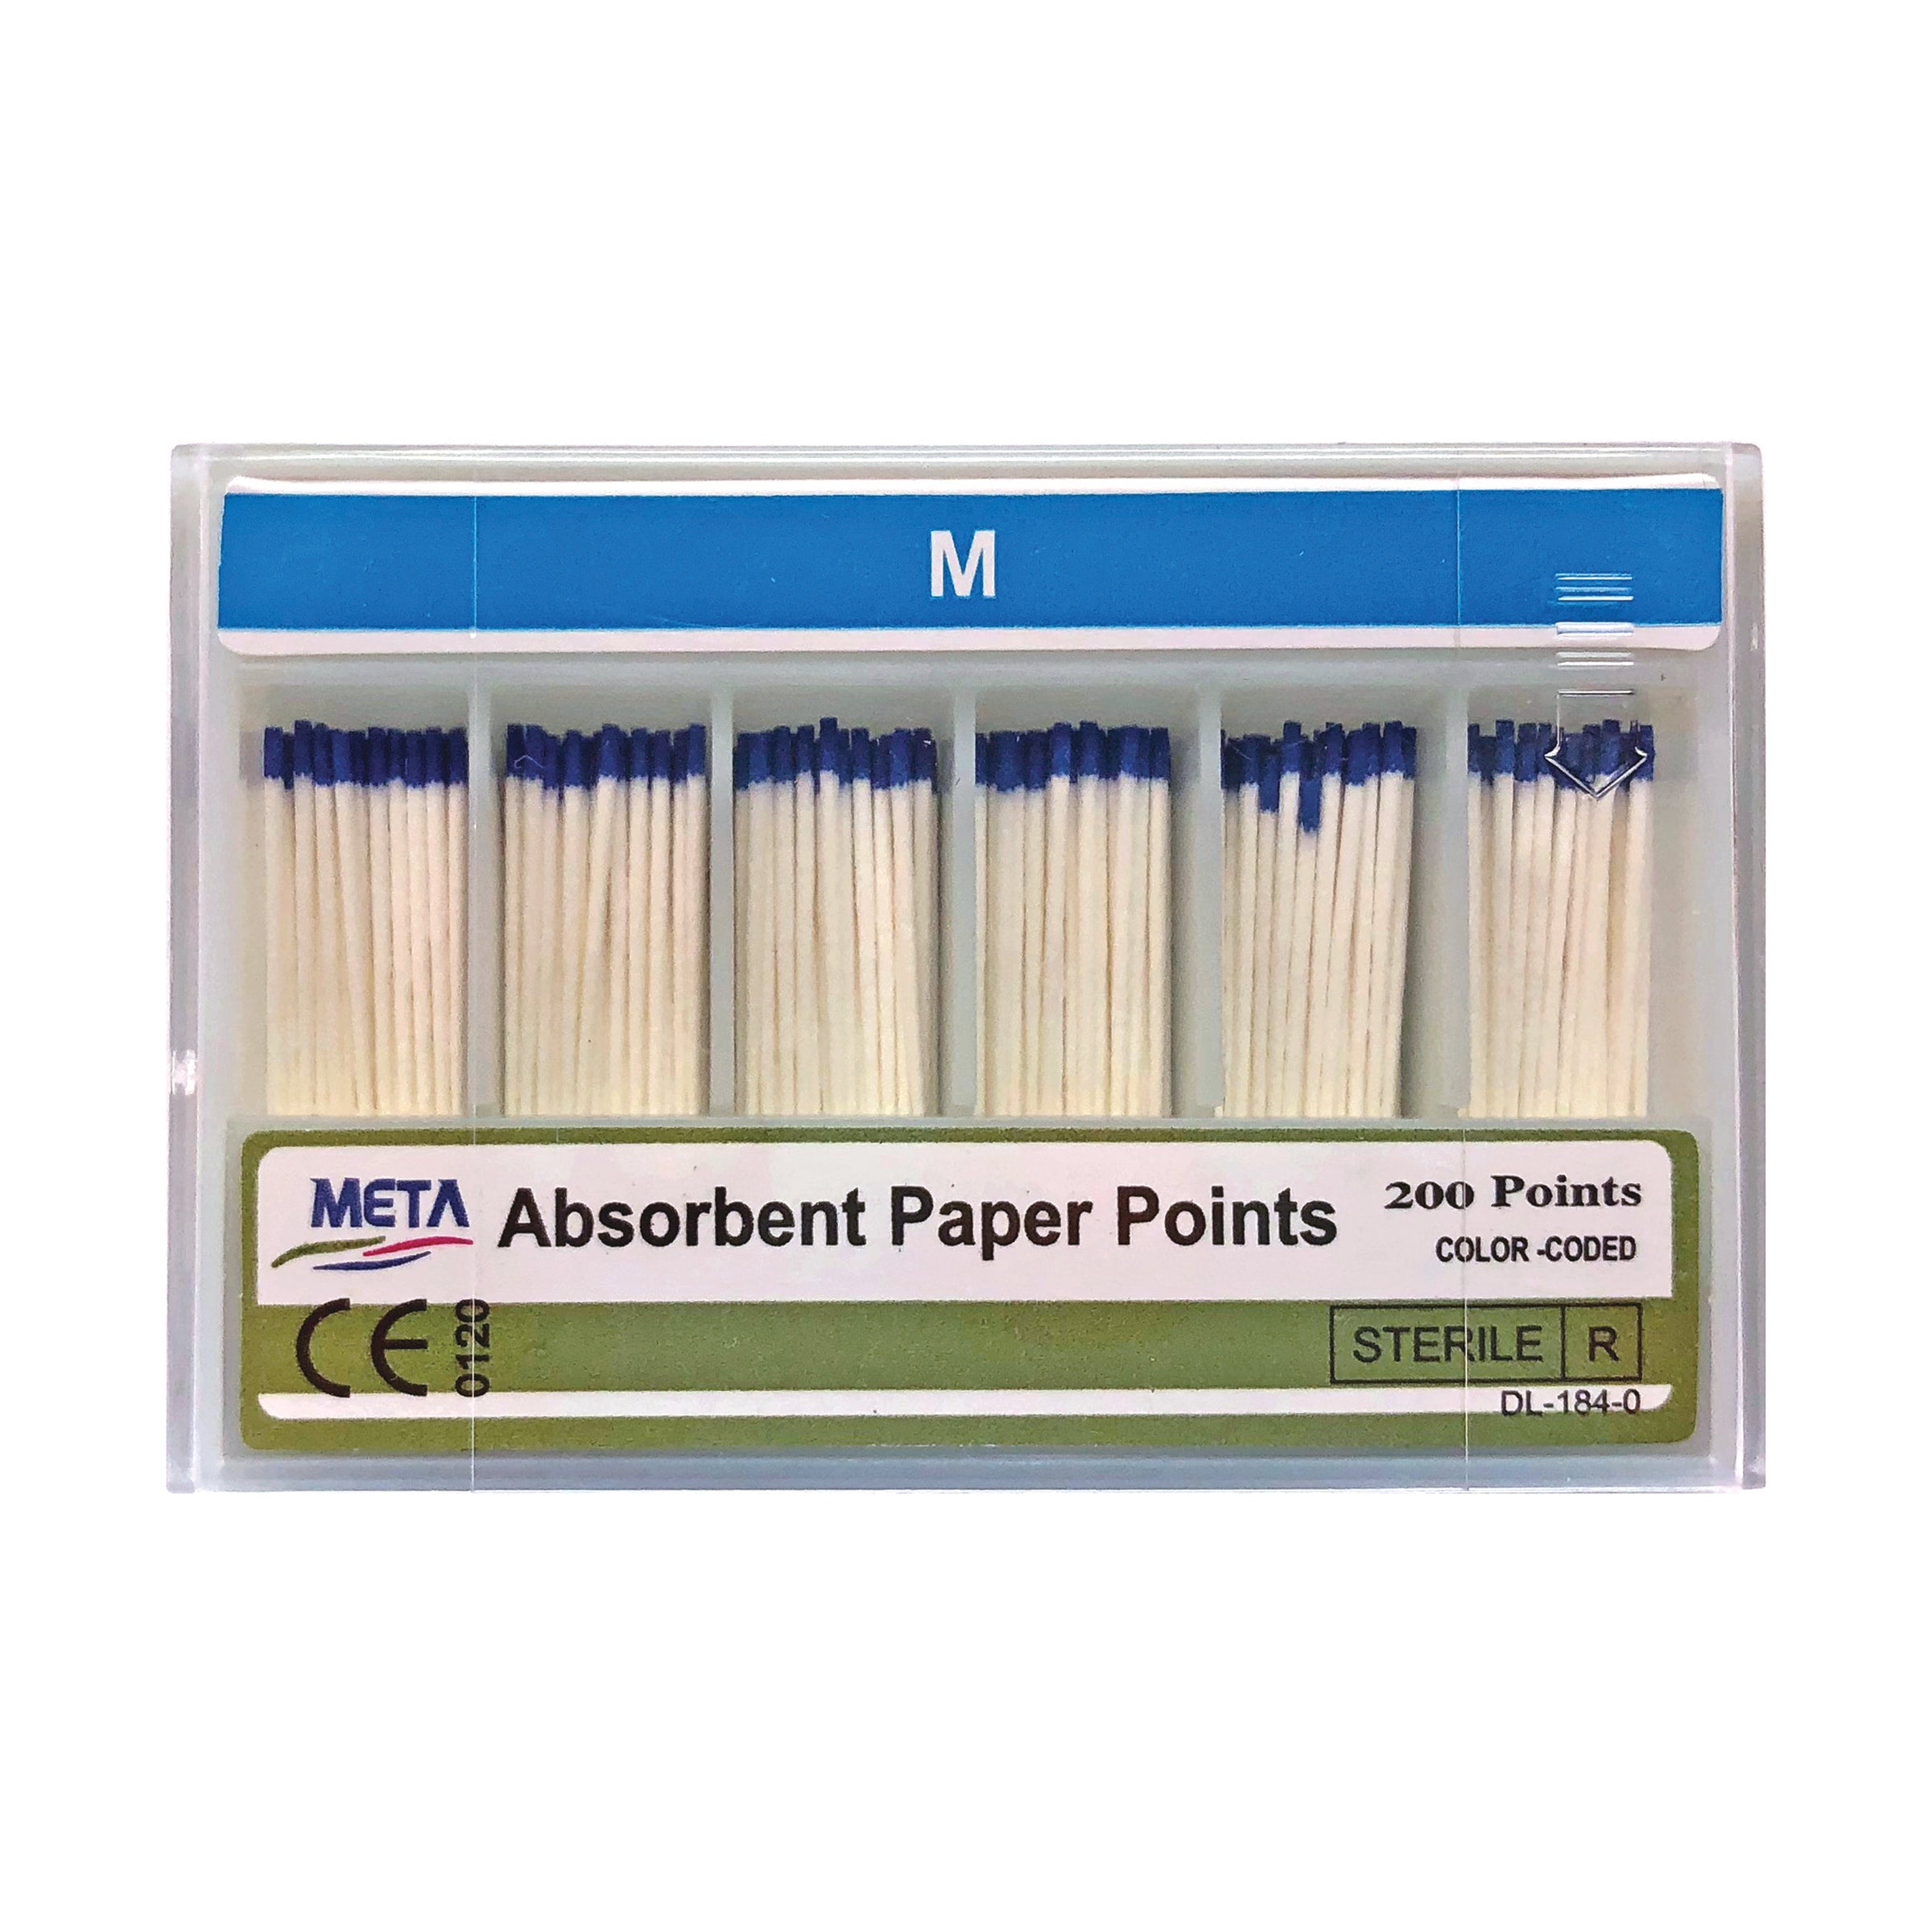 Absorbent Paperpoints - Spillproof Slide Box